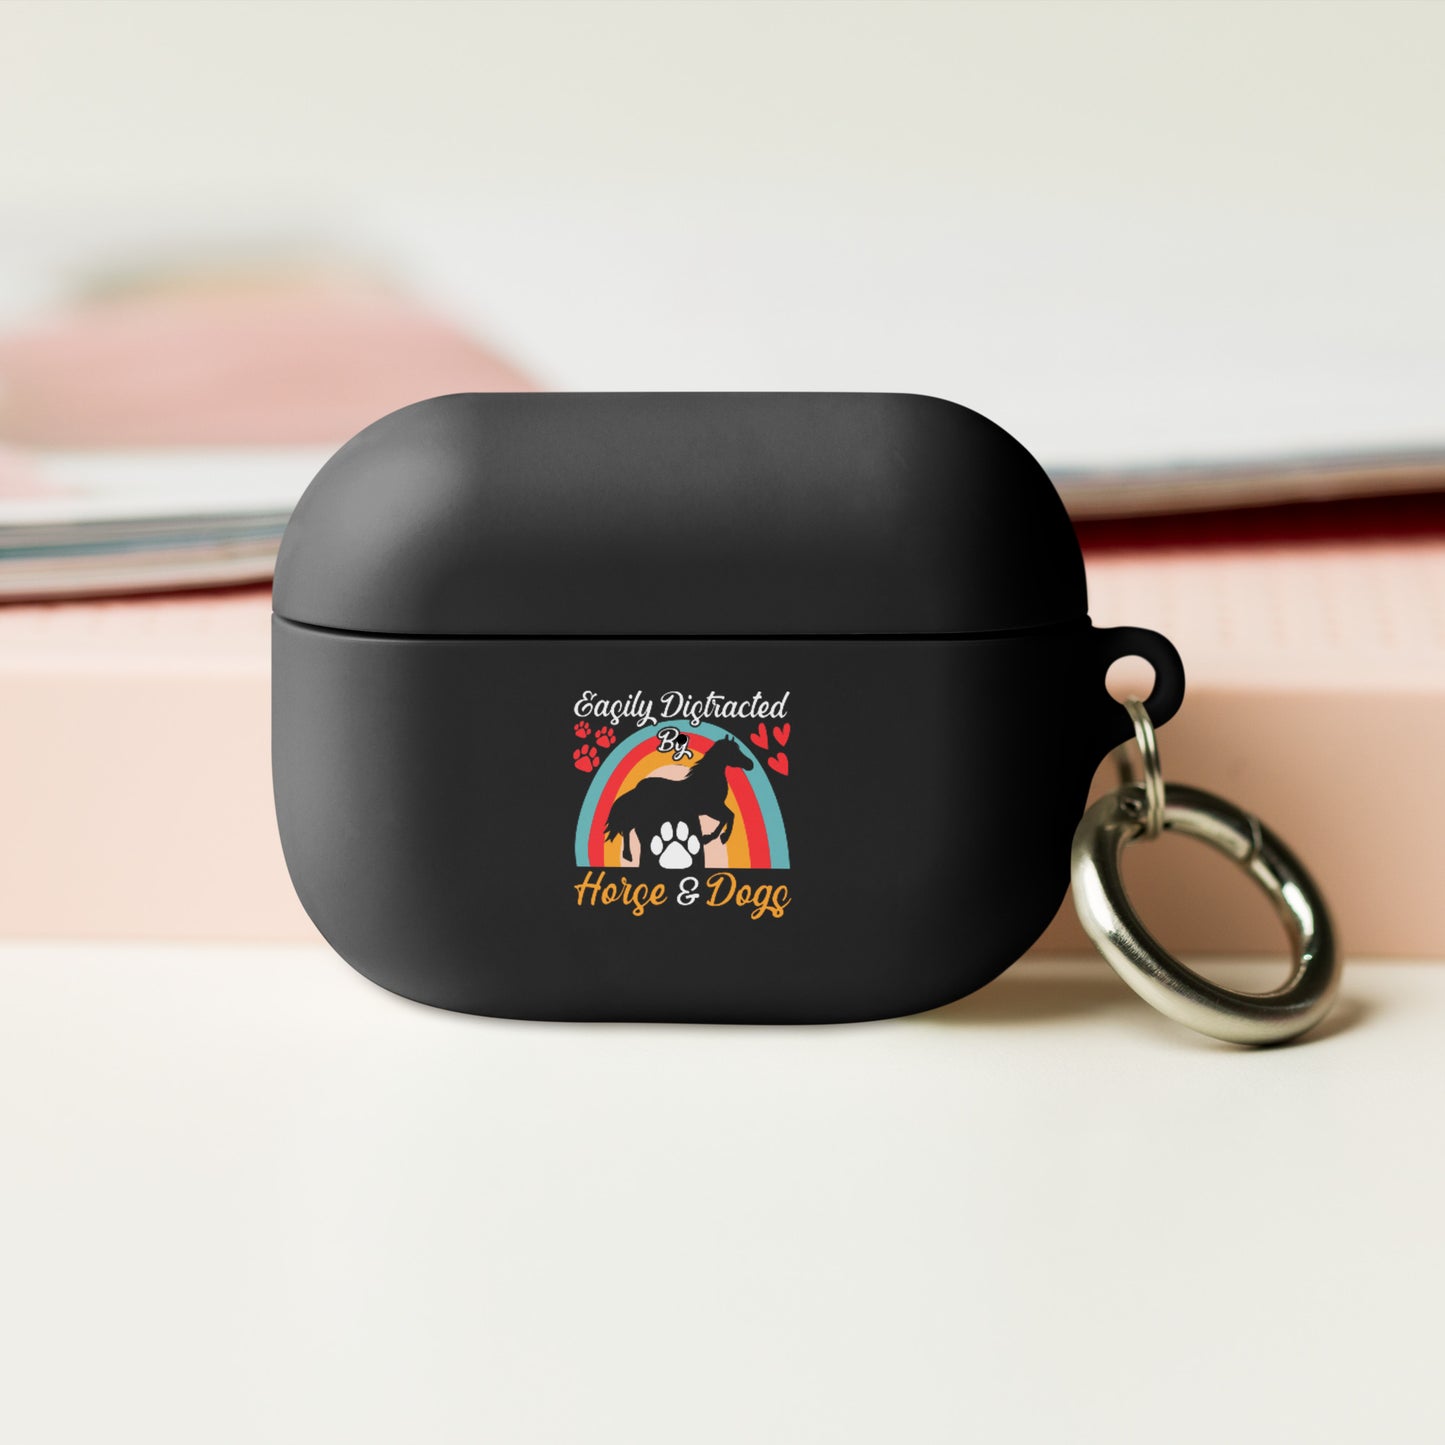 Easily Distracted by Horse and Dogs AirPods case